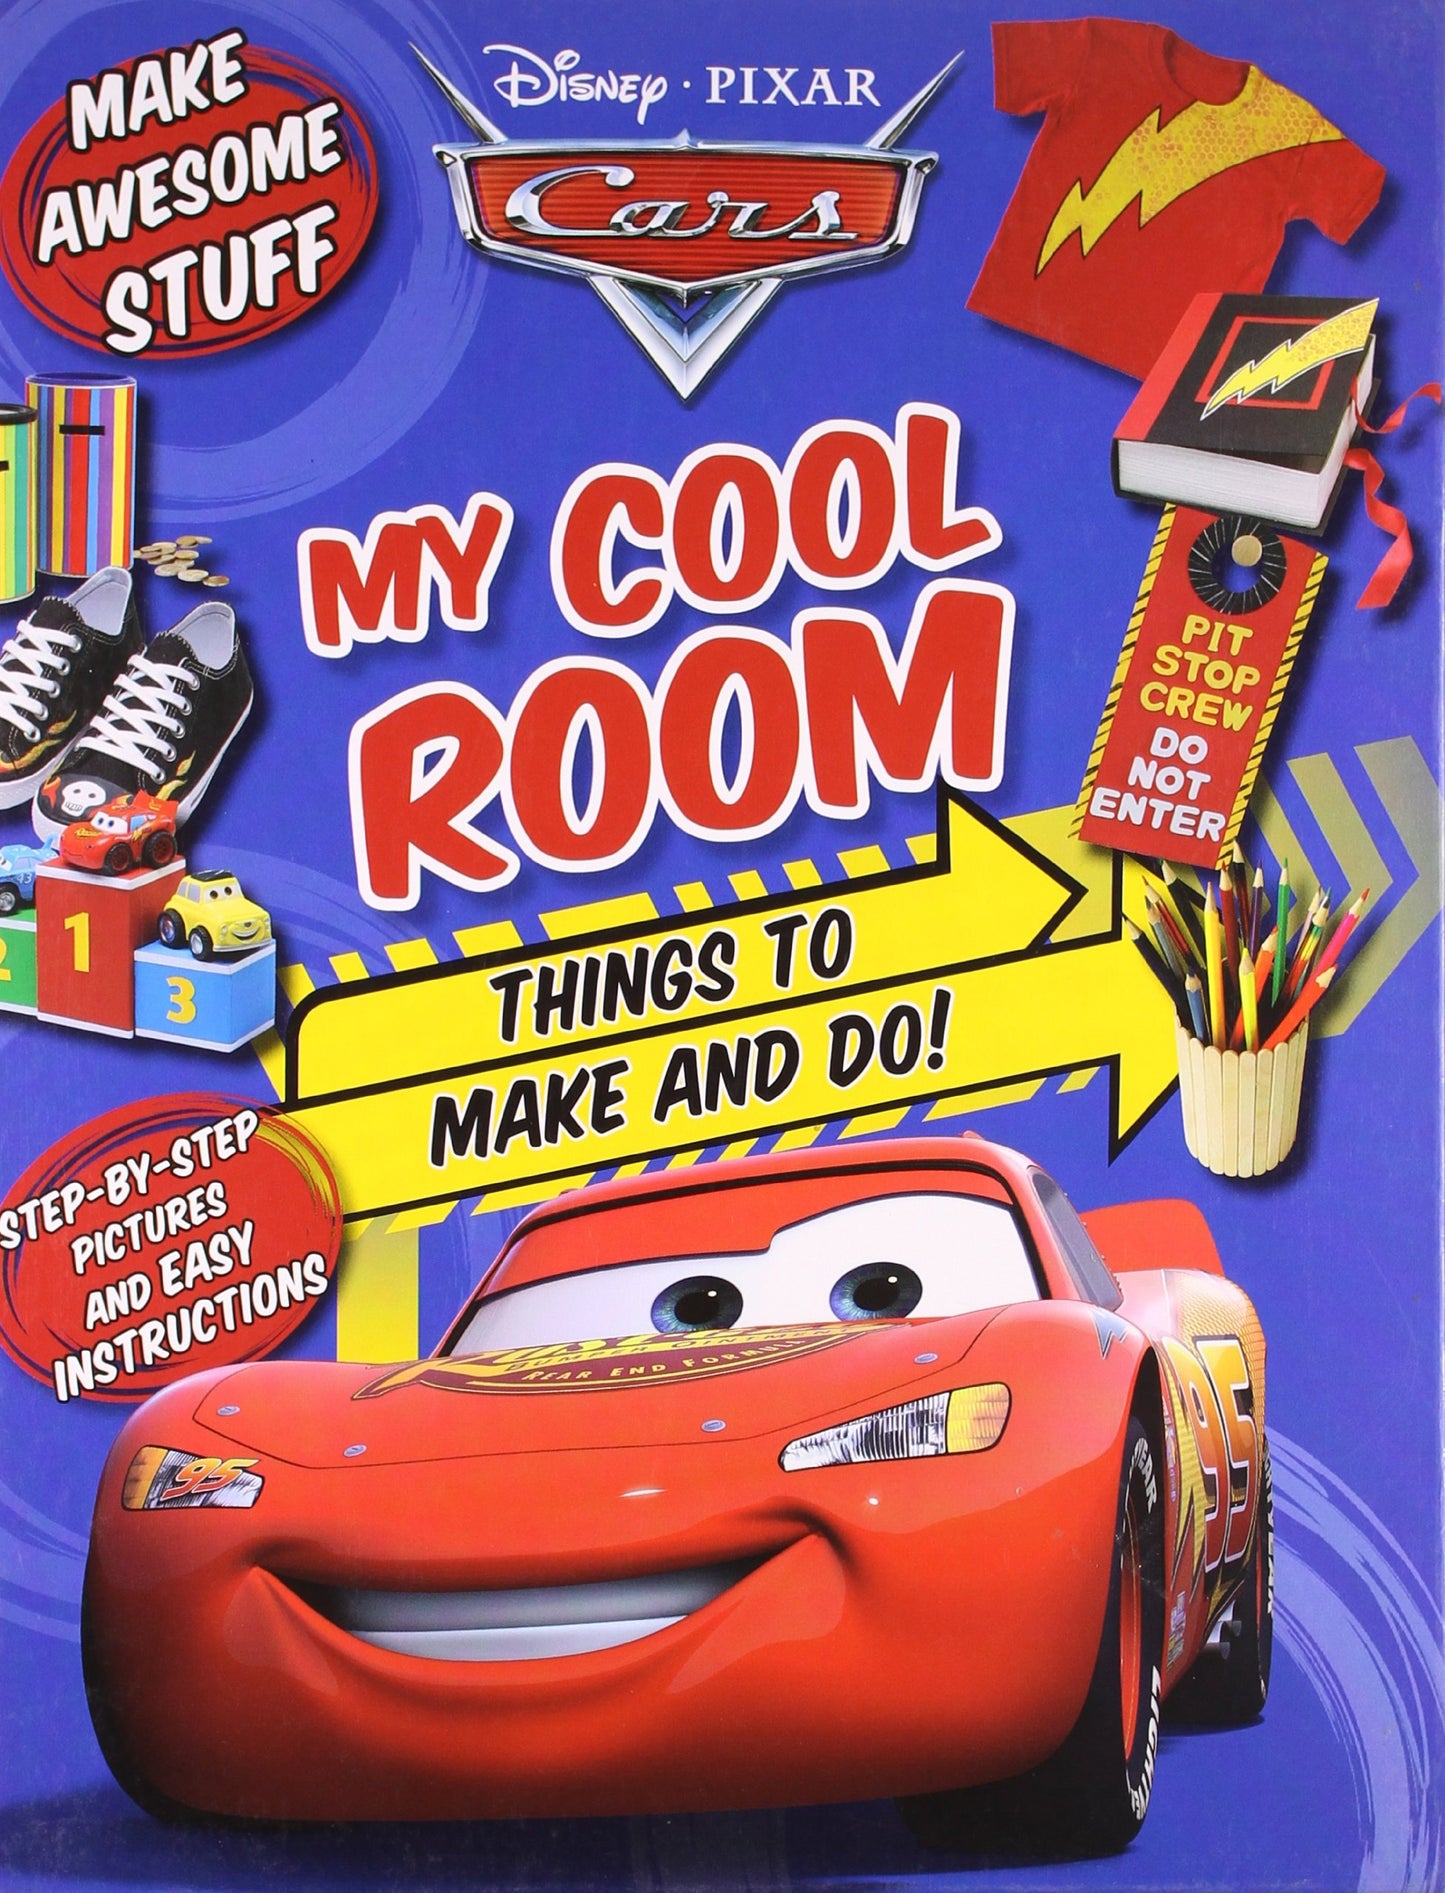 Disney Pixar My Cool Room - Things to Make and Do!